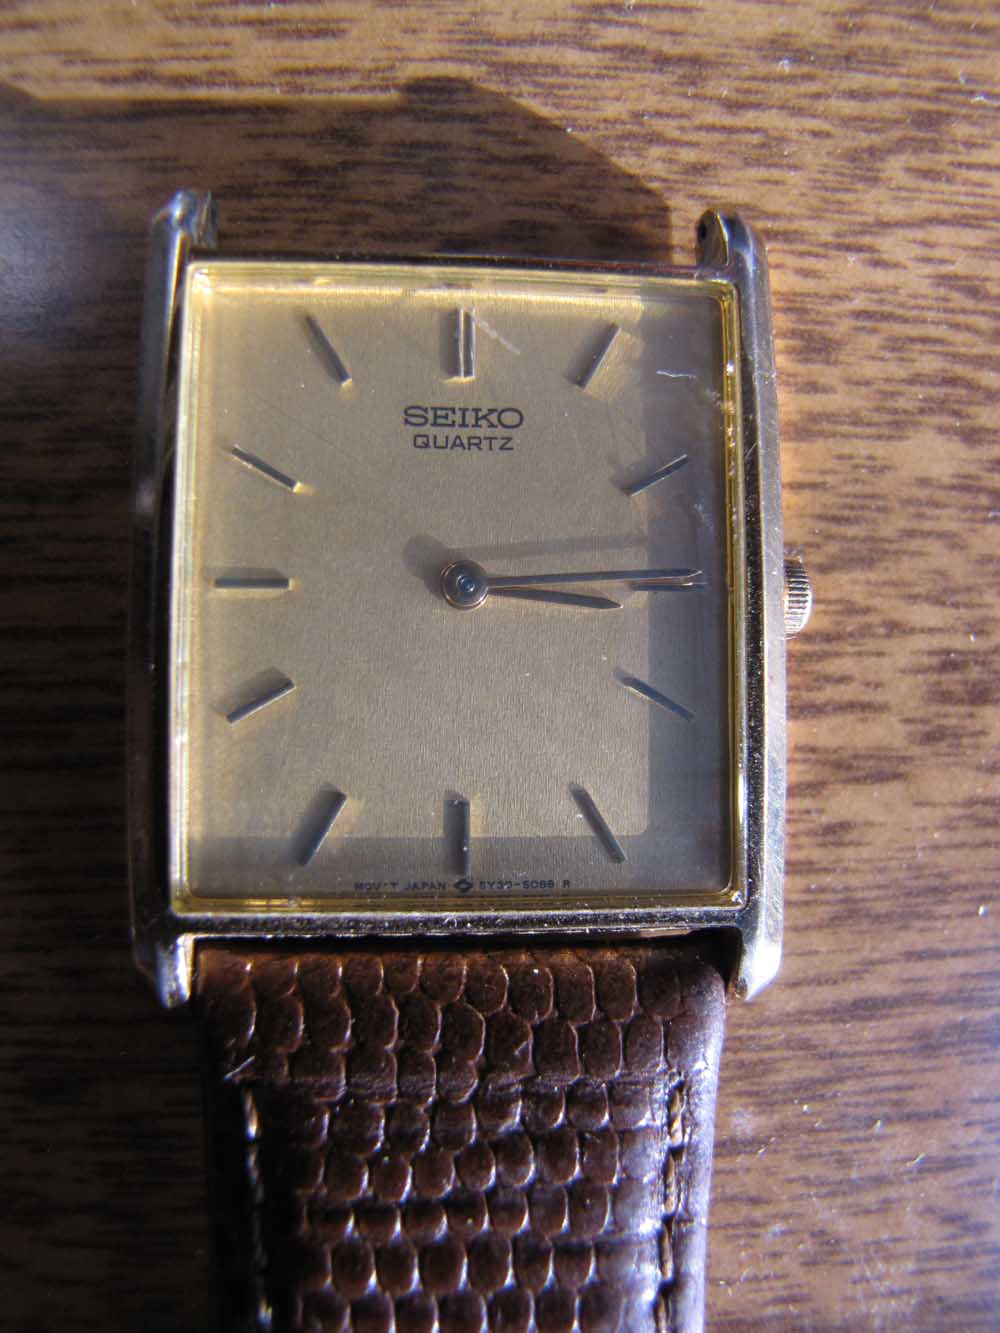 Please help me identify my Seiko watch - picture added | The Watch Site